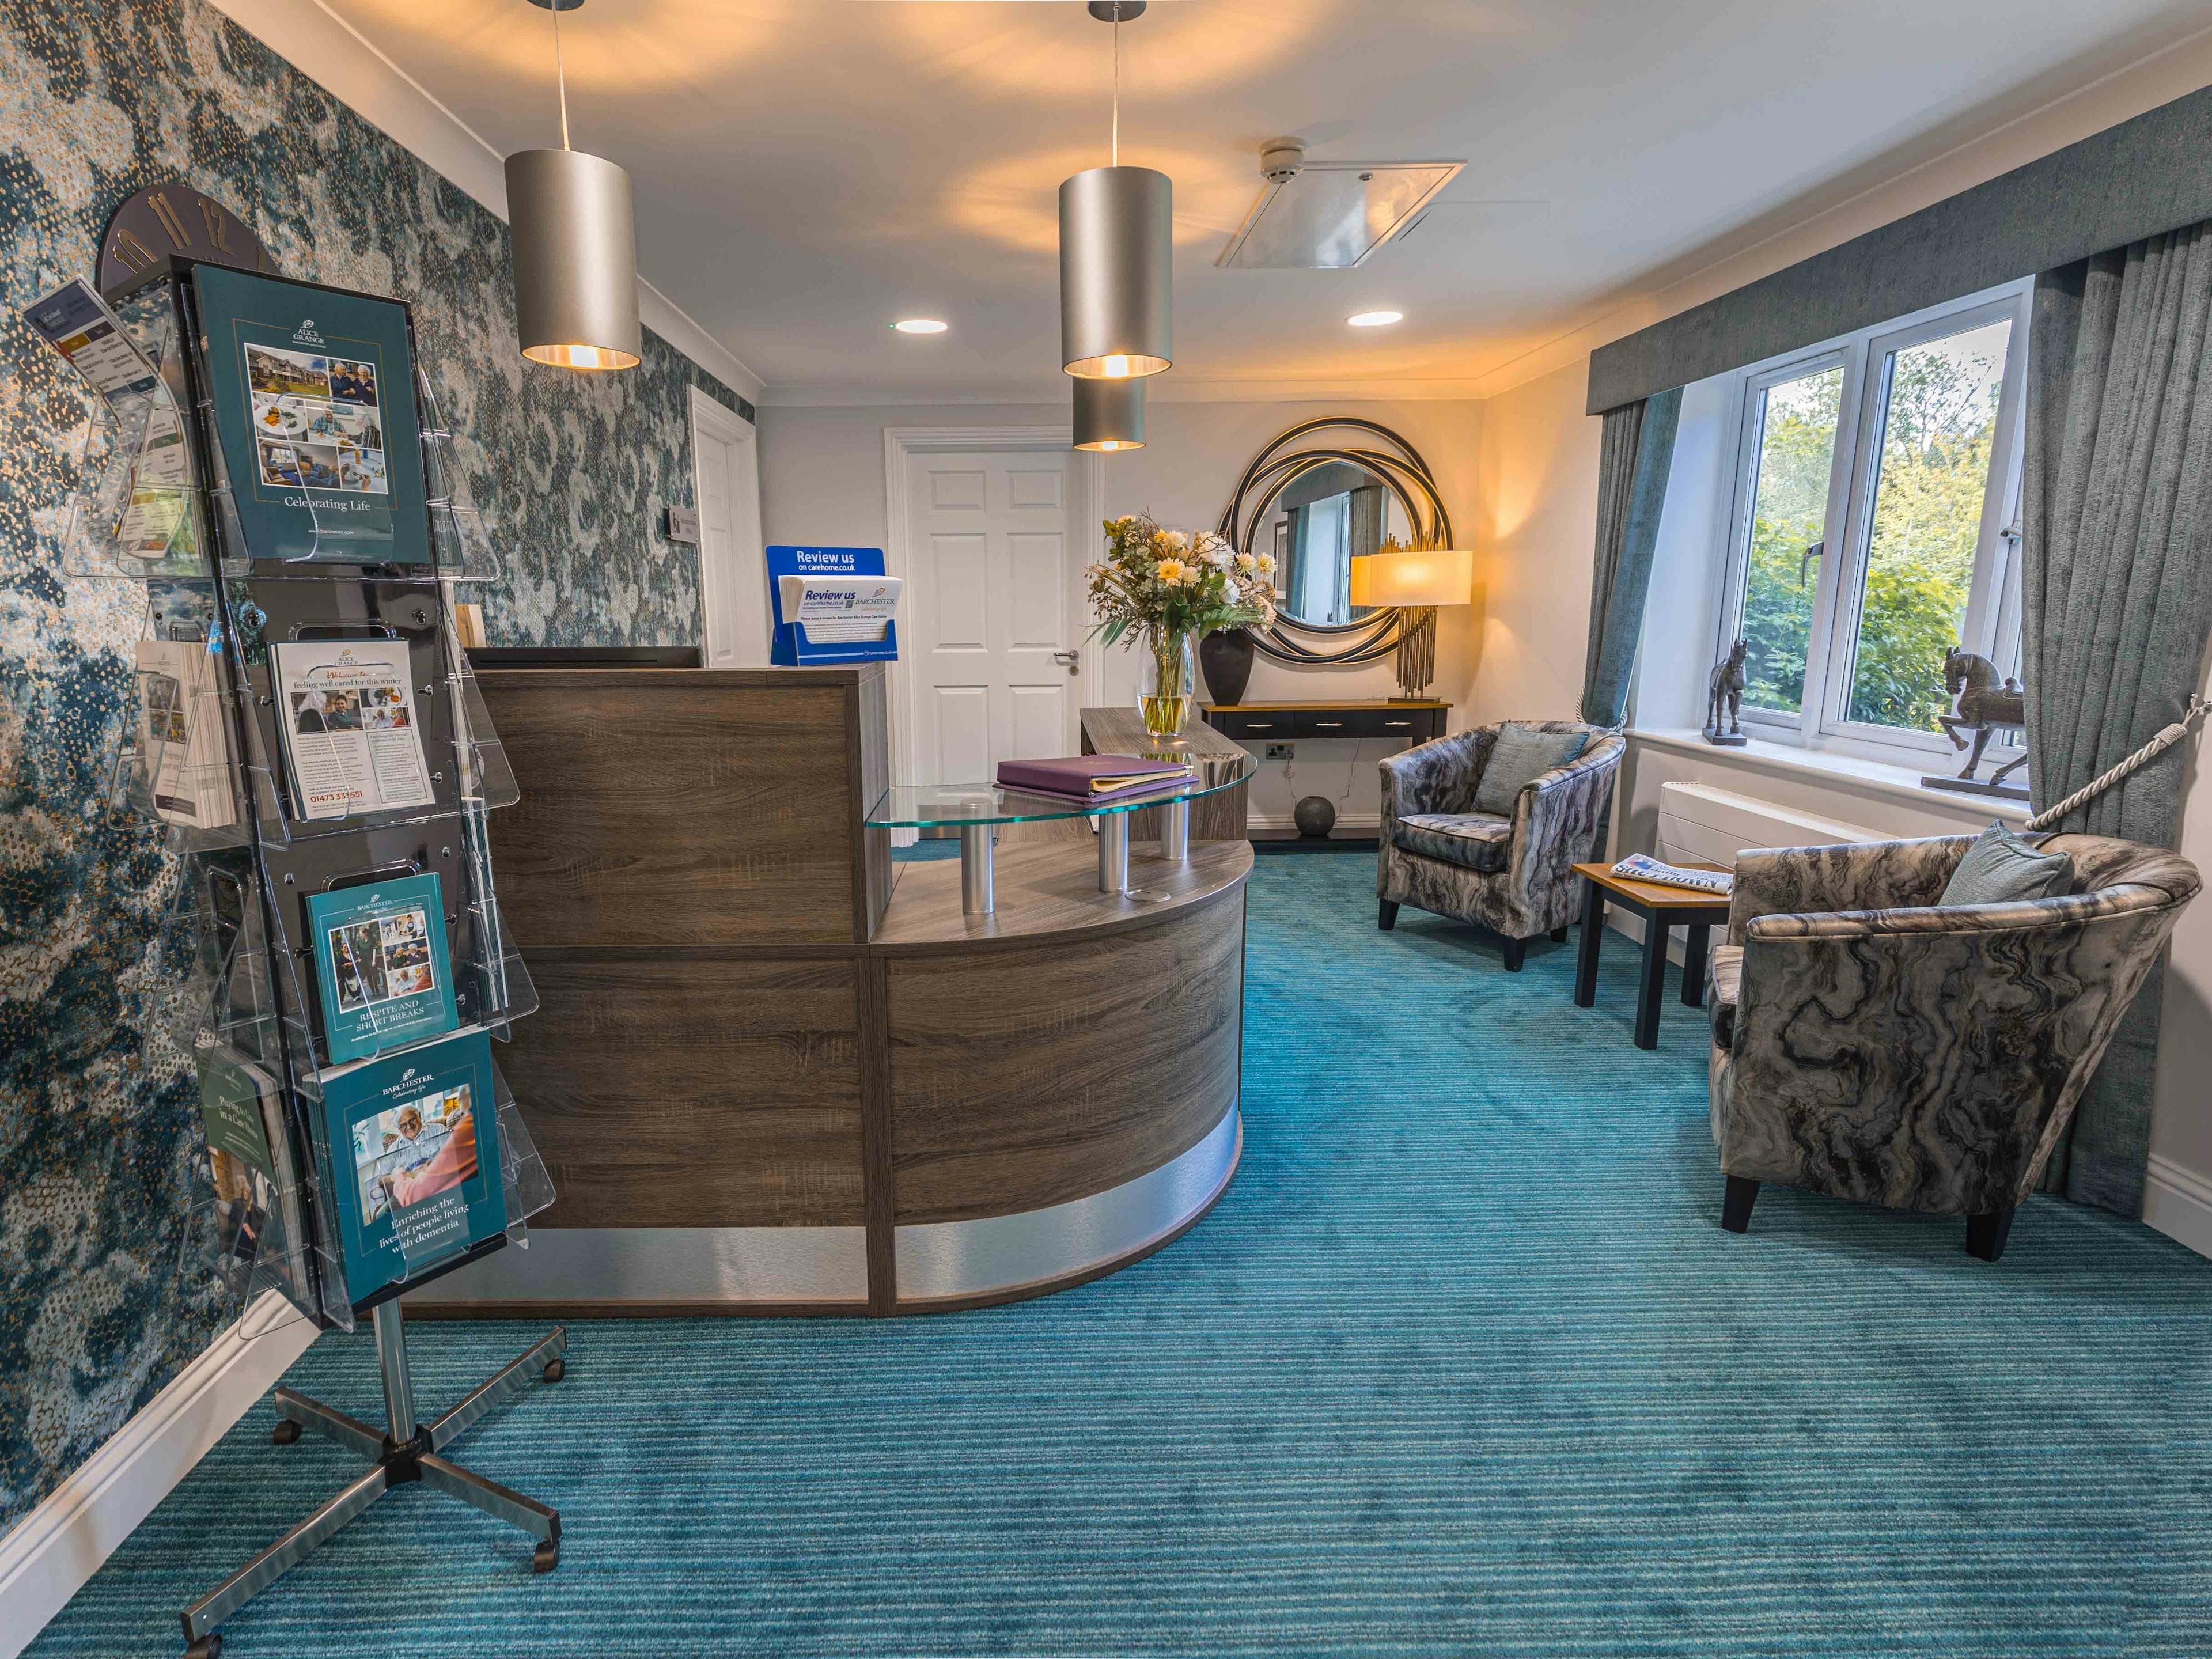 Reception at Alice Grange Care Home in Kesgrave, East Suffolk